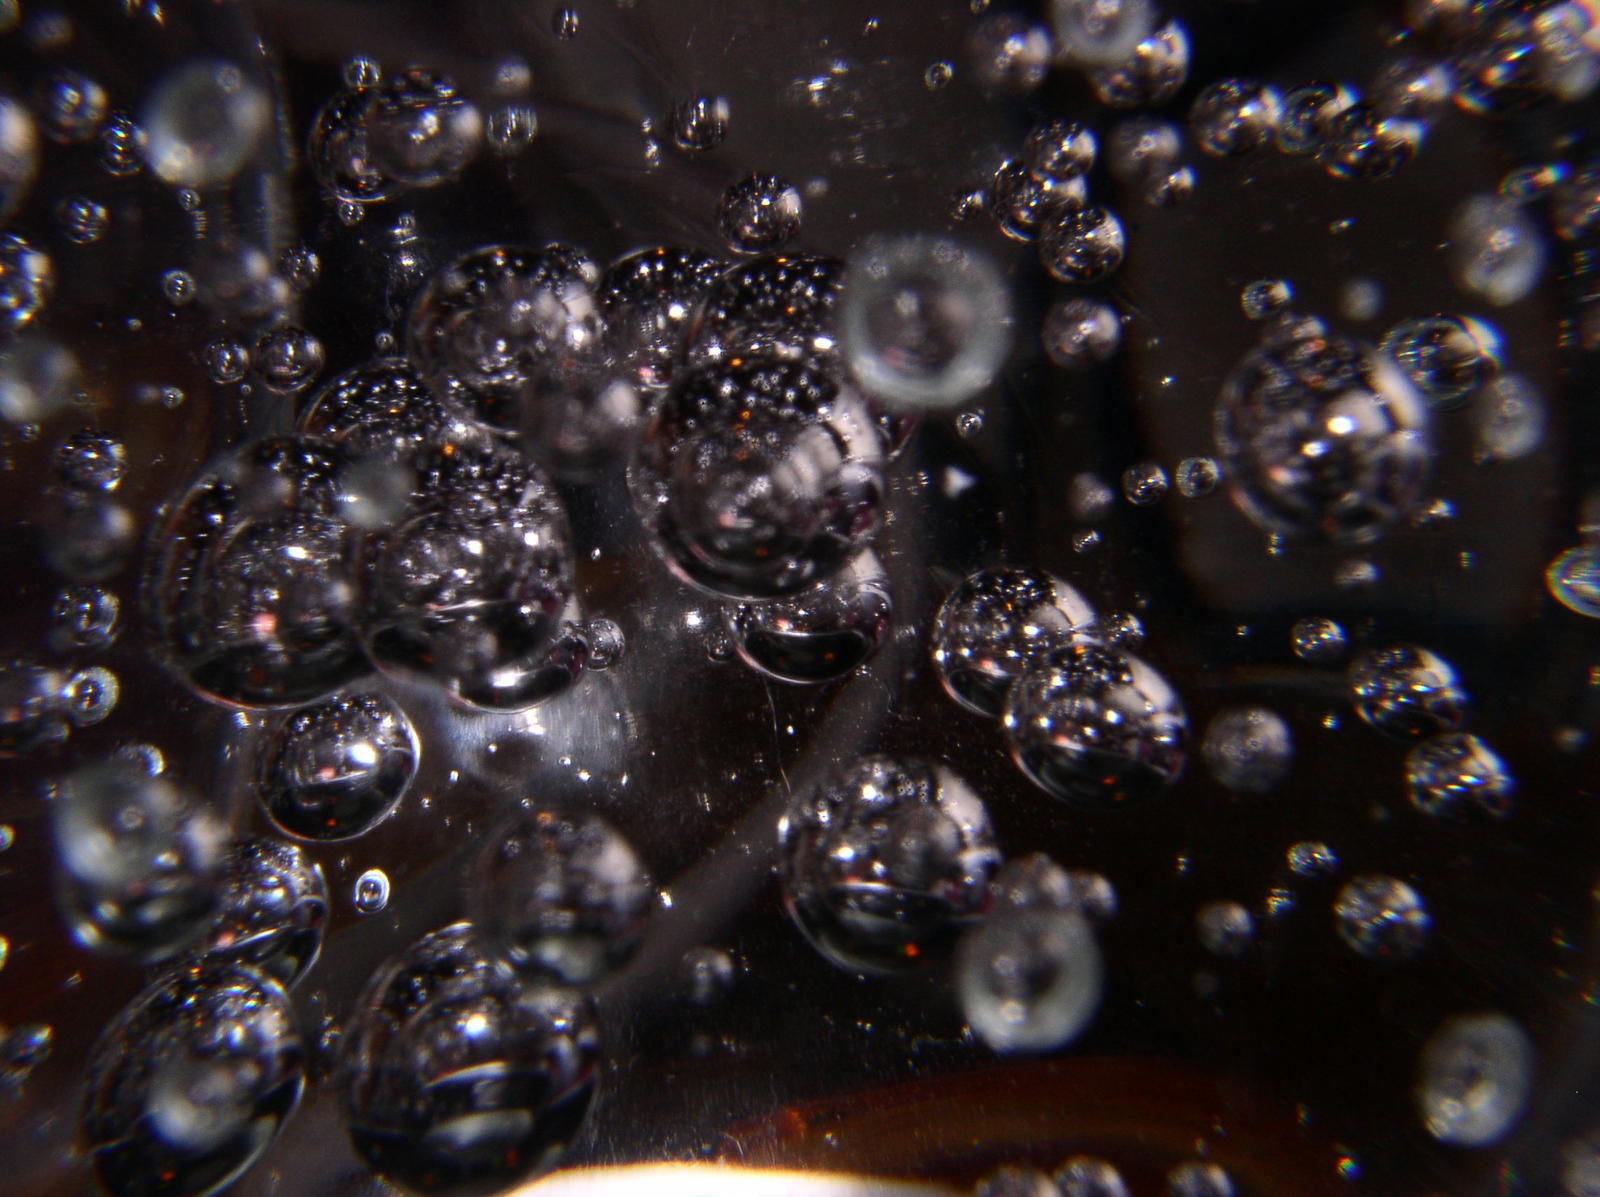 droplets of water are placed around the bubbles